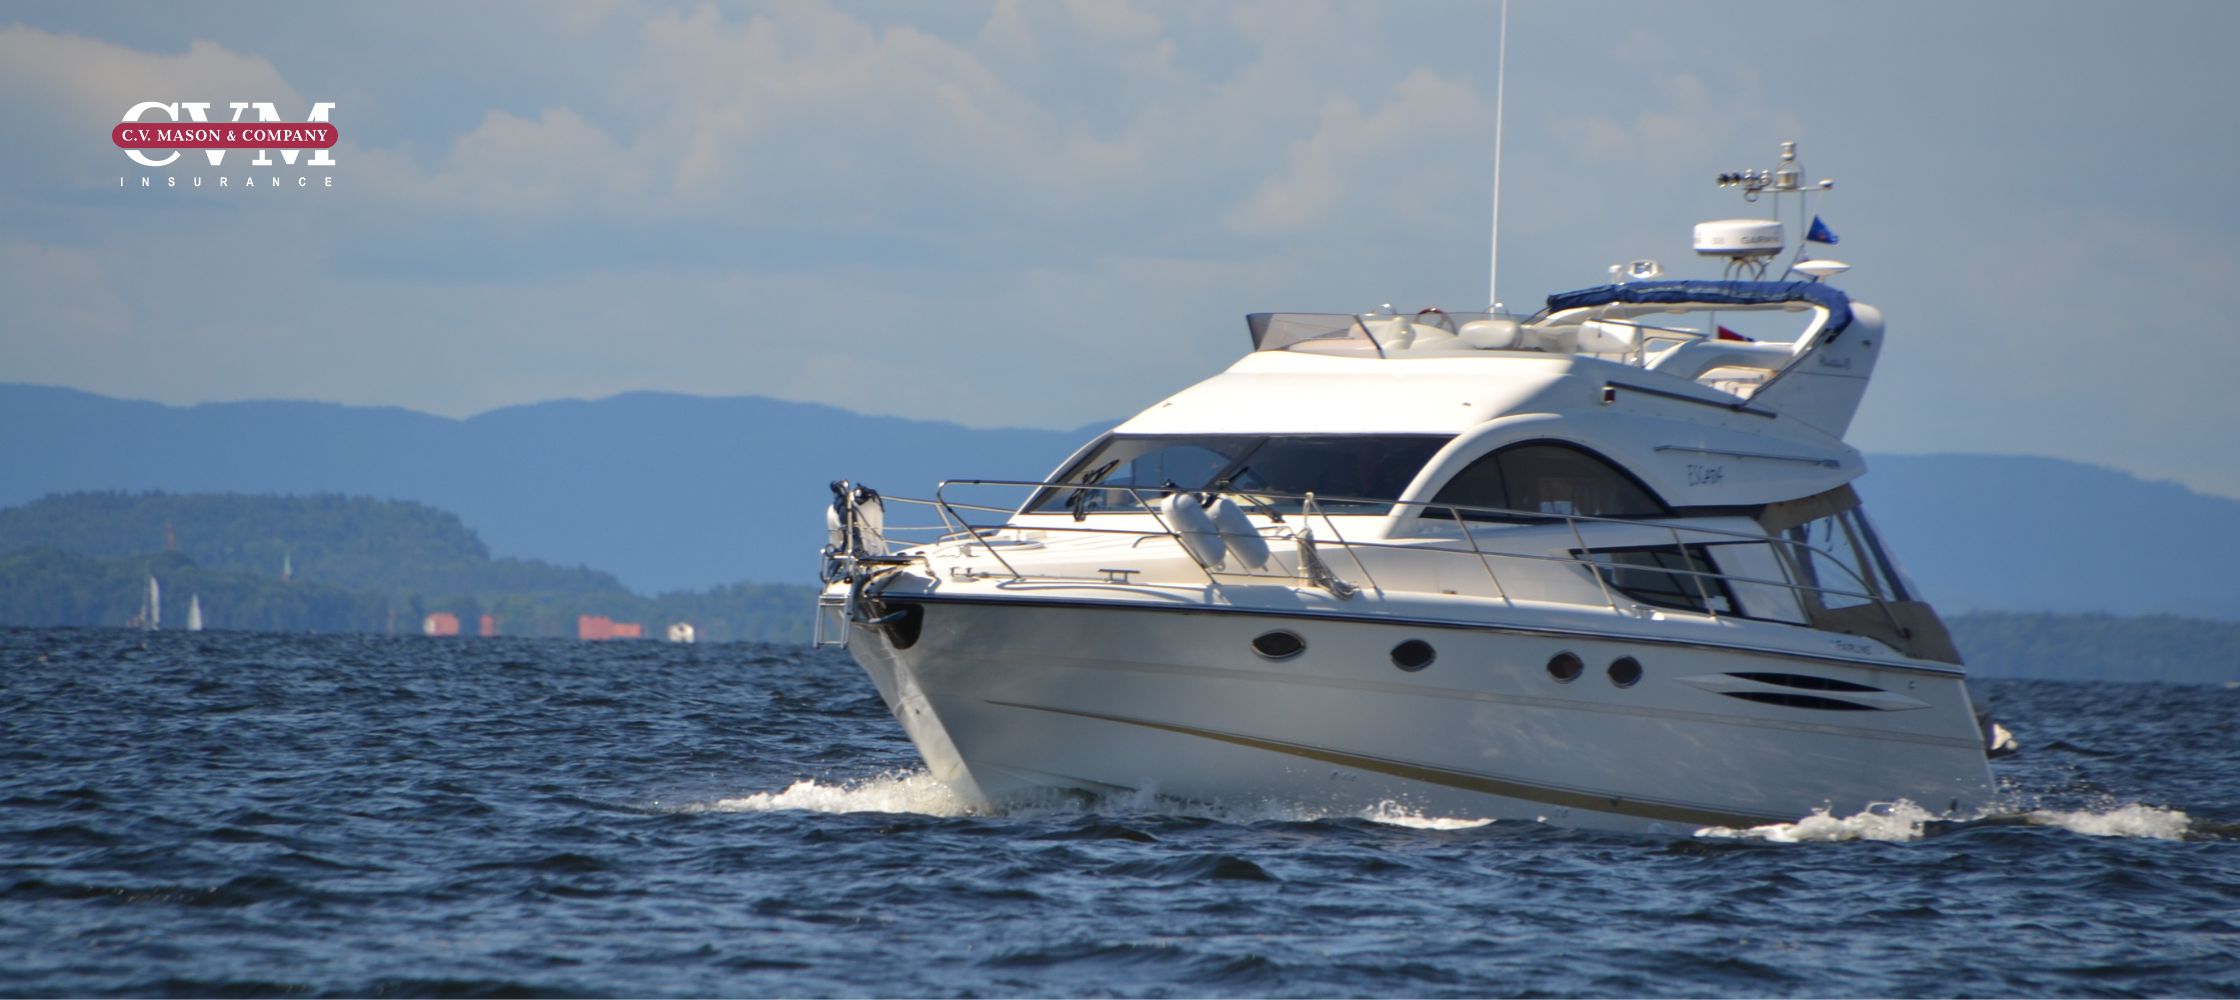 does boat insurance cover theft